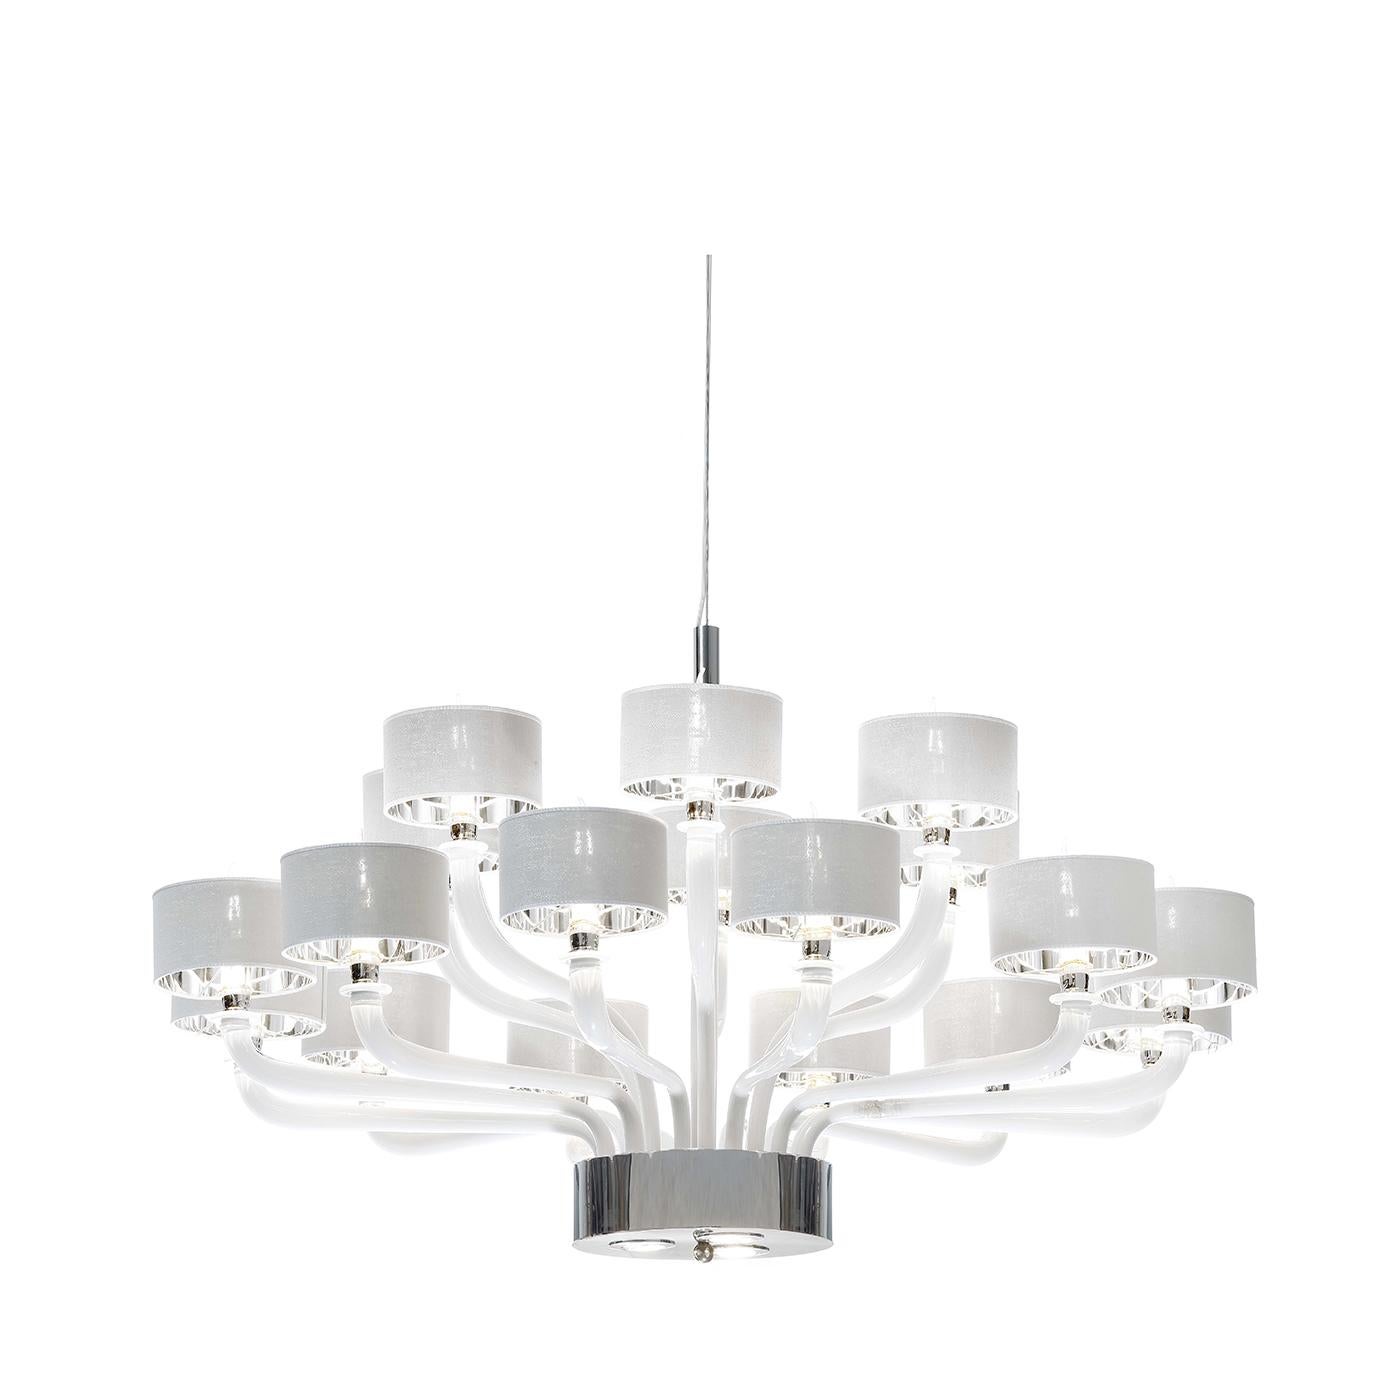 The sophisticated design of this superb chandelier mixes traditional shapes and a contemporary attitude, making it a timeless object of functional decor that will enliven any home. The white Venetian mouth-blown glass forms the curved arms of the 18